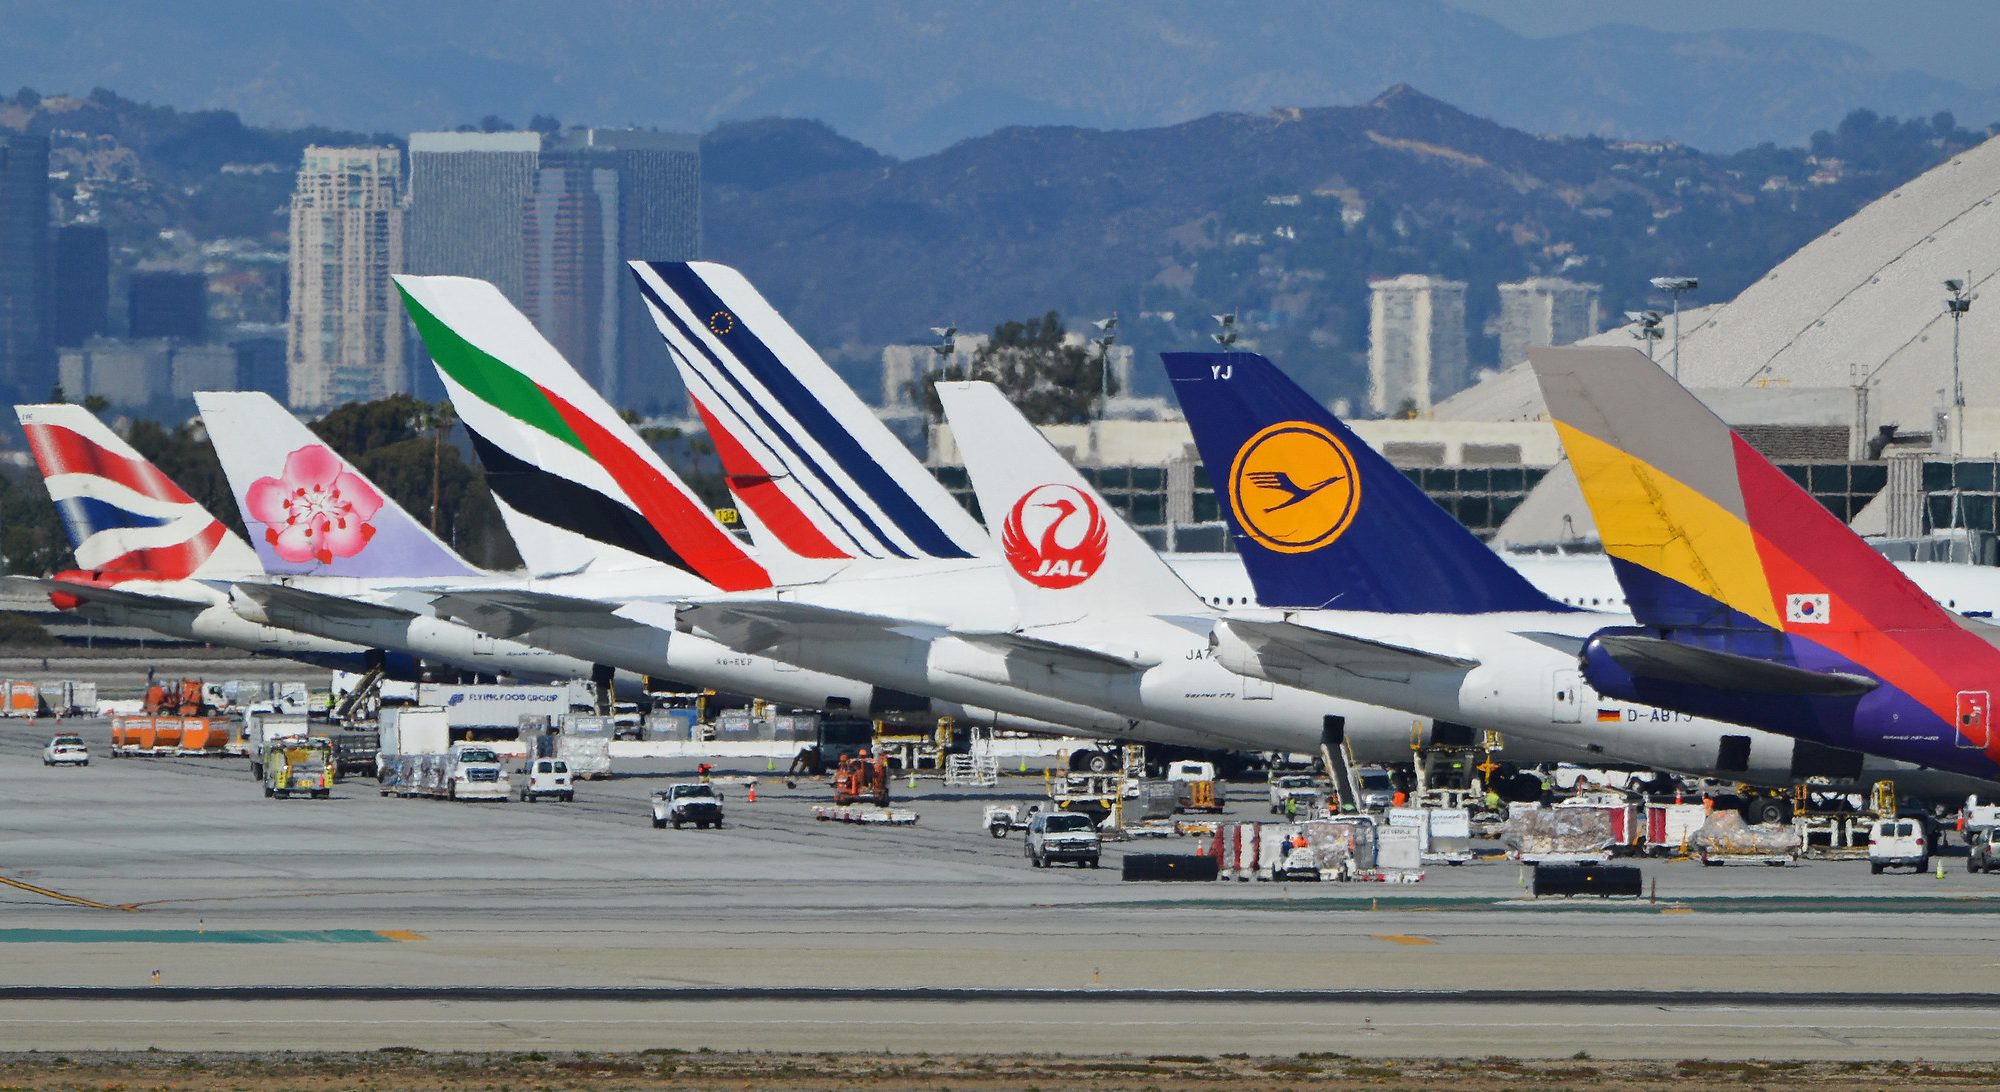 airplanes lined up at the airport